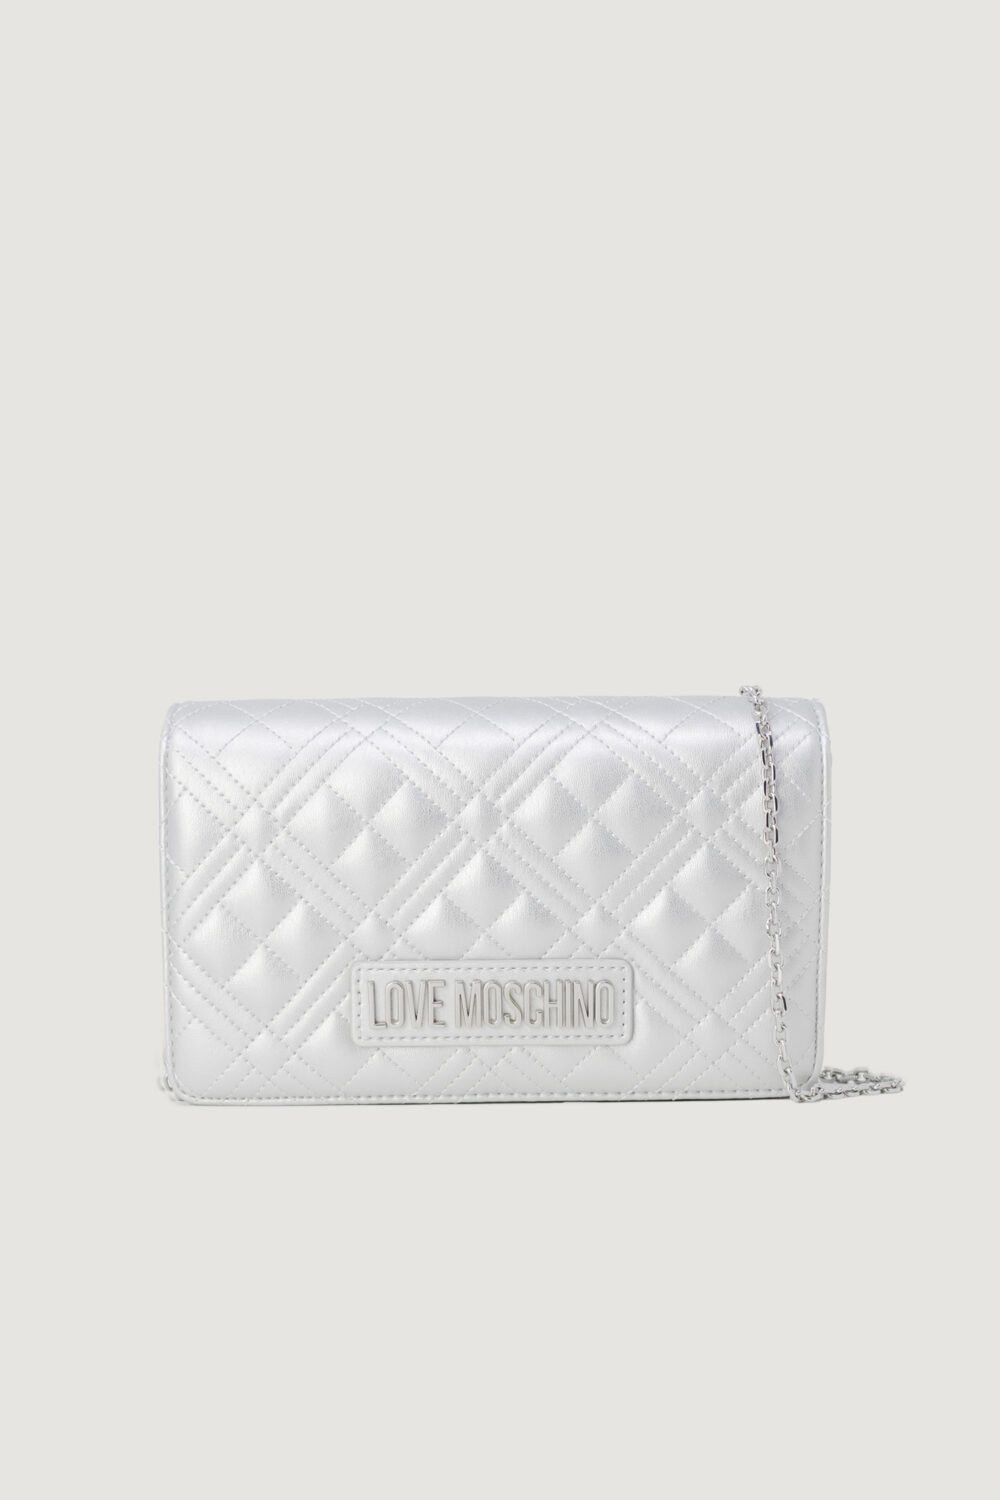 Borsa Love Moschino QUILTED Argento - Foto 1